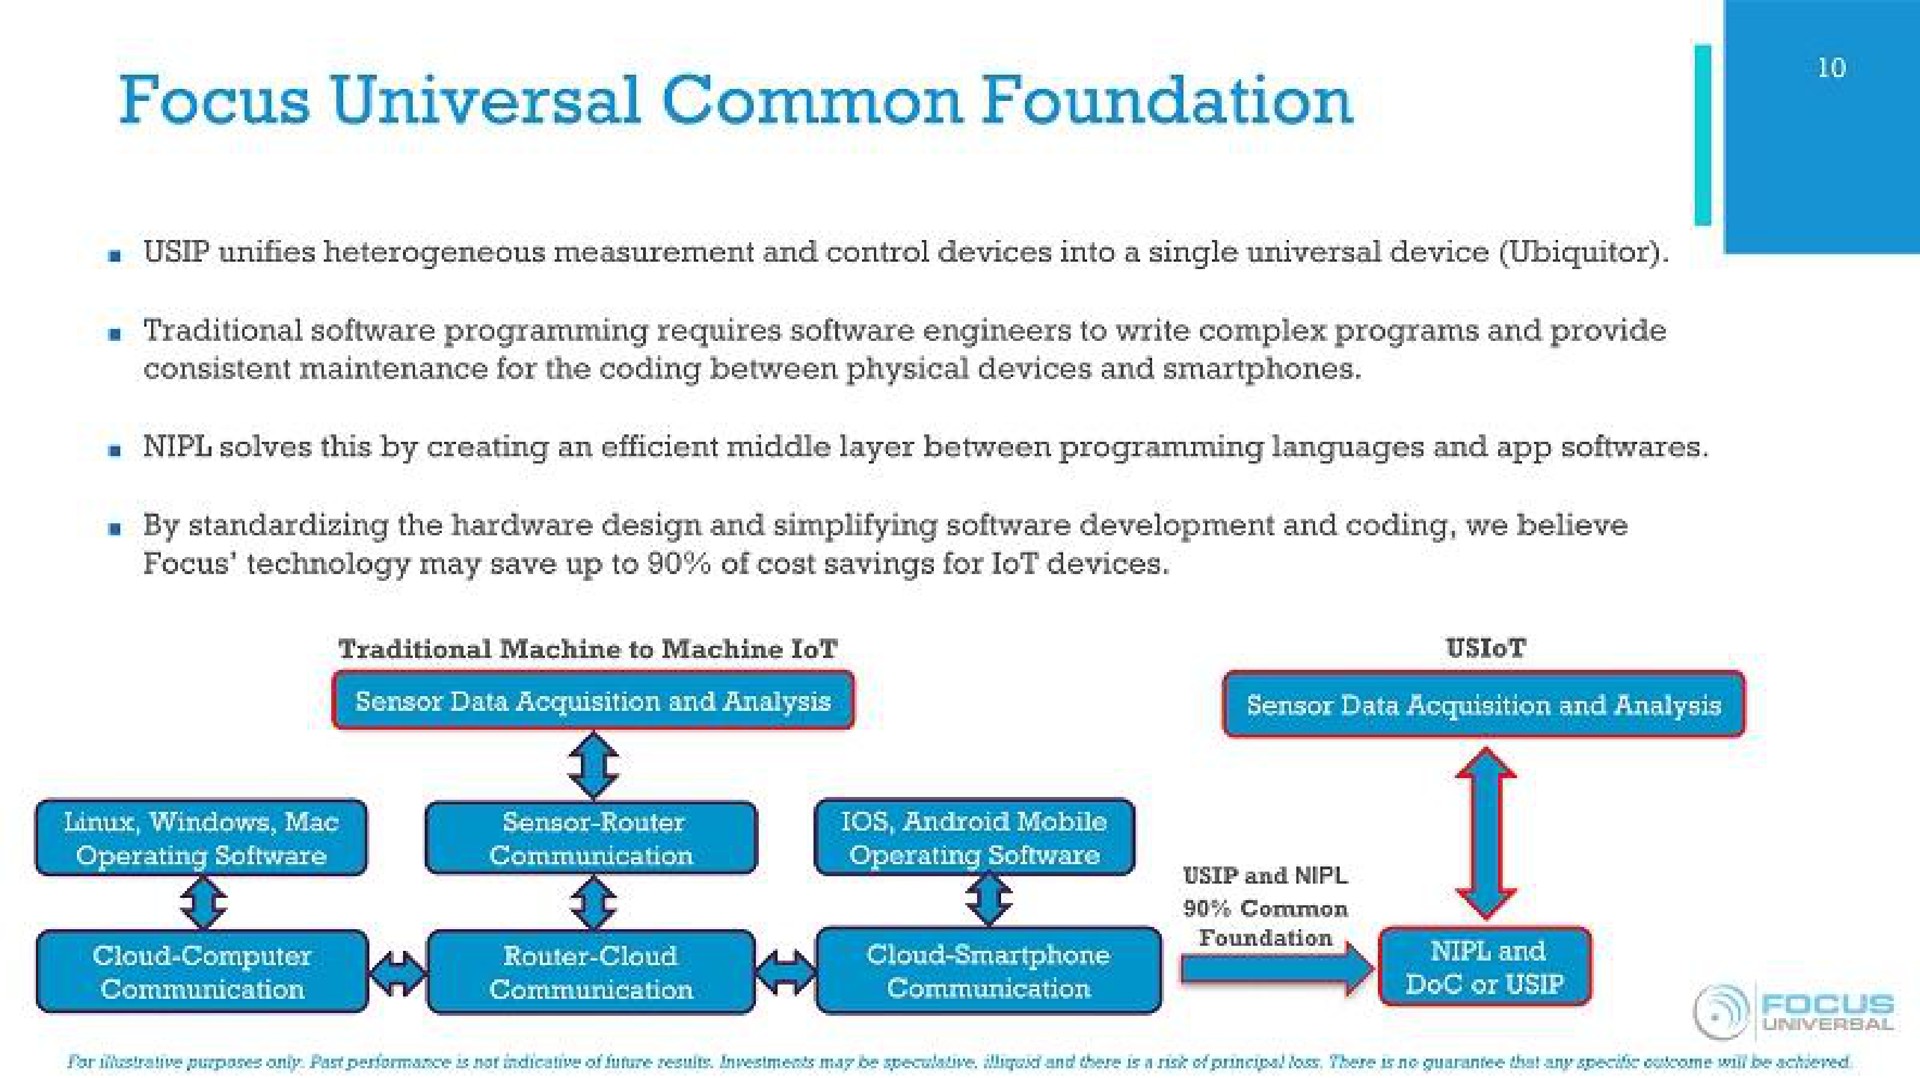 focus universal common foundation traditional programming requires engineers to write complex programs and provide consistent maintenance for the coding between physical devices and solves this by creating an efficient middle layer between programming languages and focus technology may save up to of cost savings for lot devices | Focus Universal